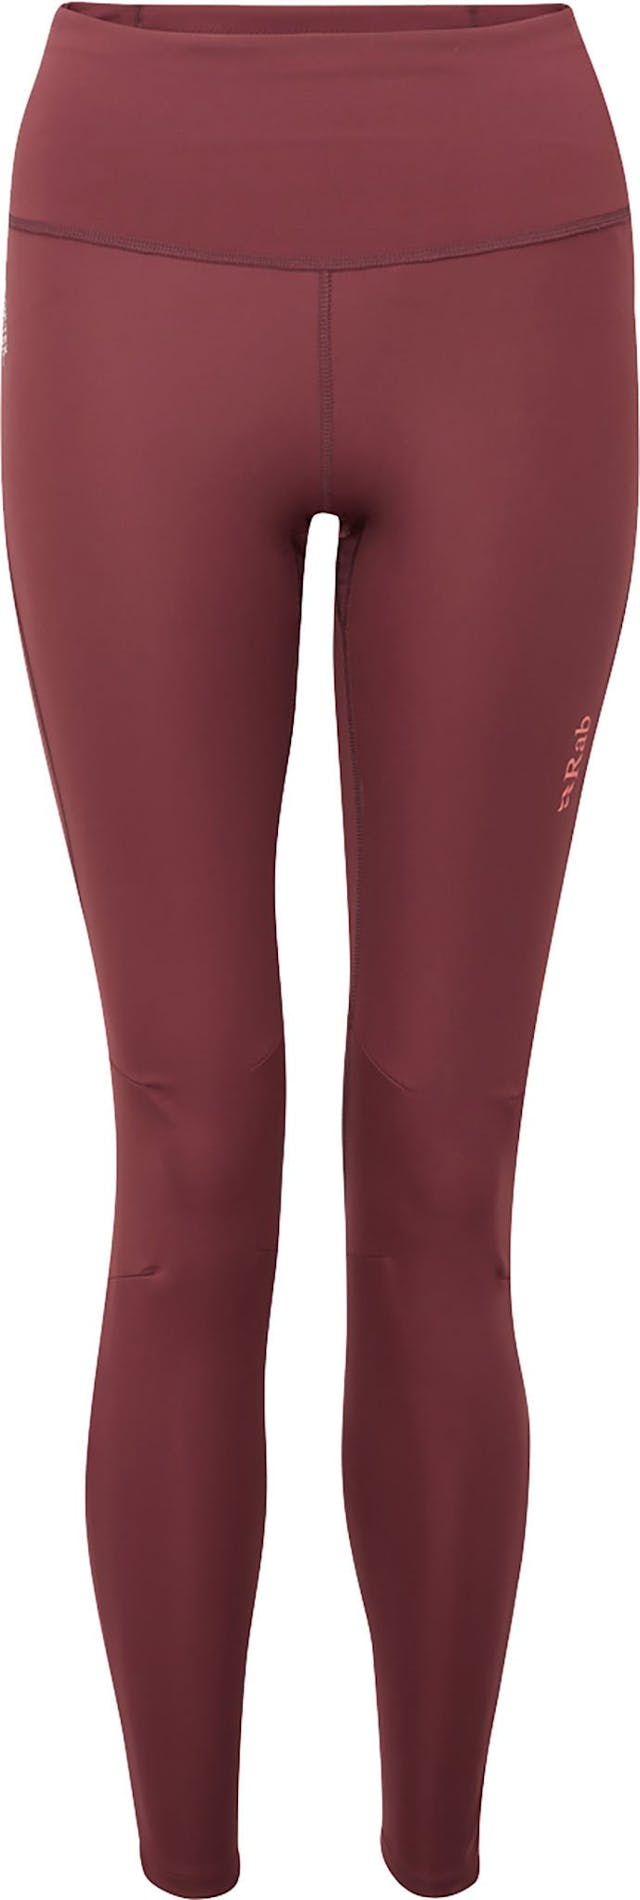 Product image for Talus Windstopper Tights - Women's